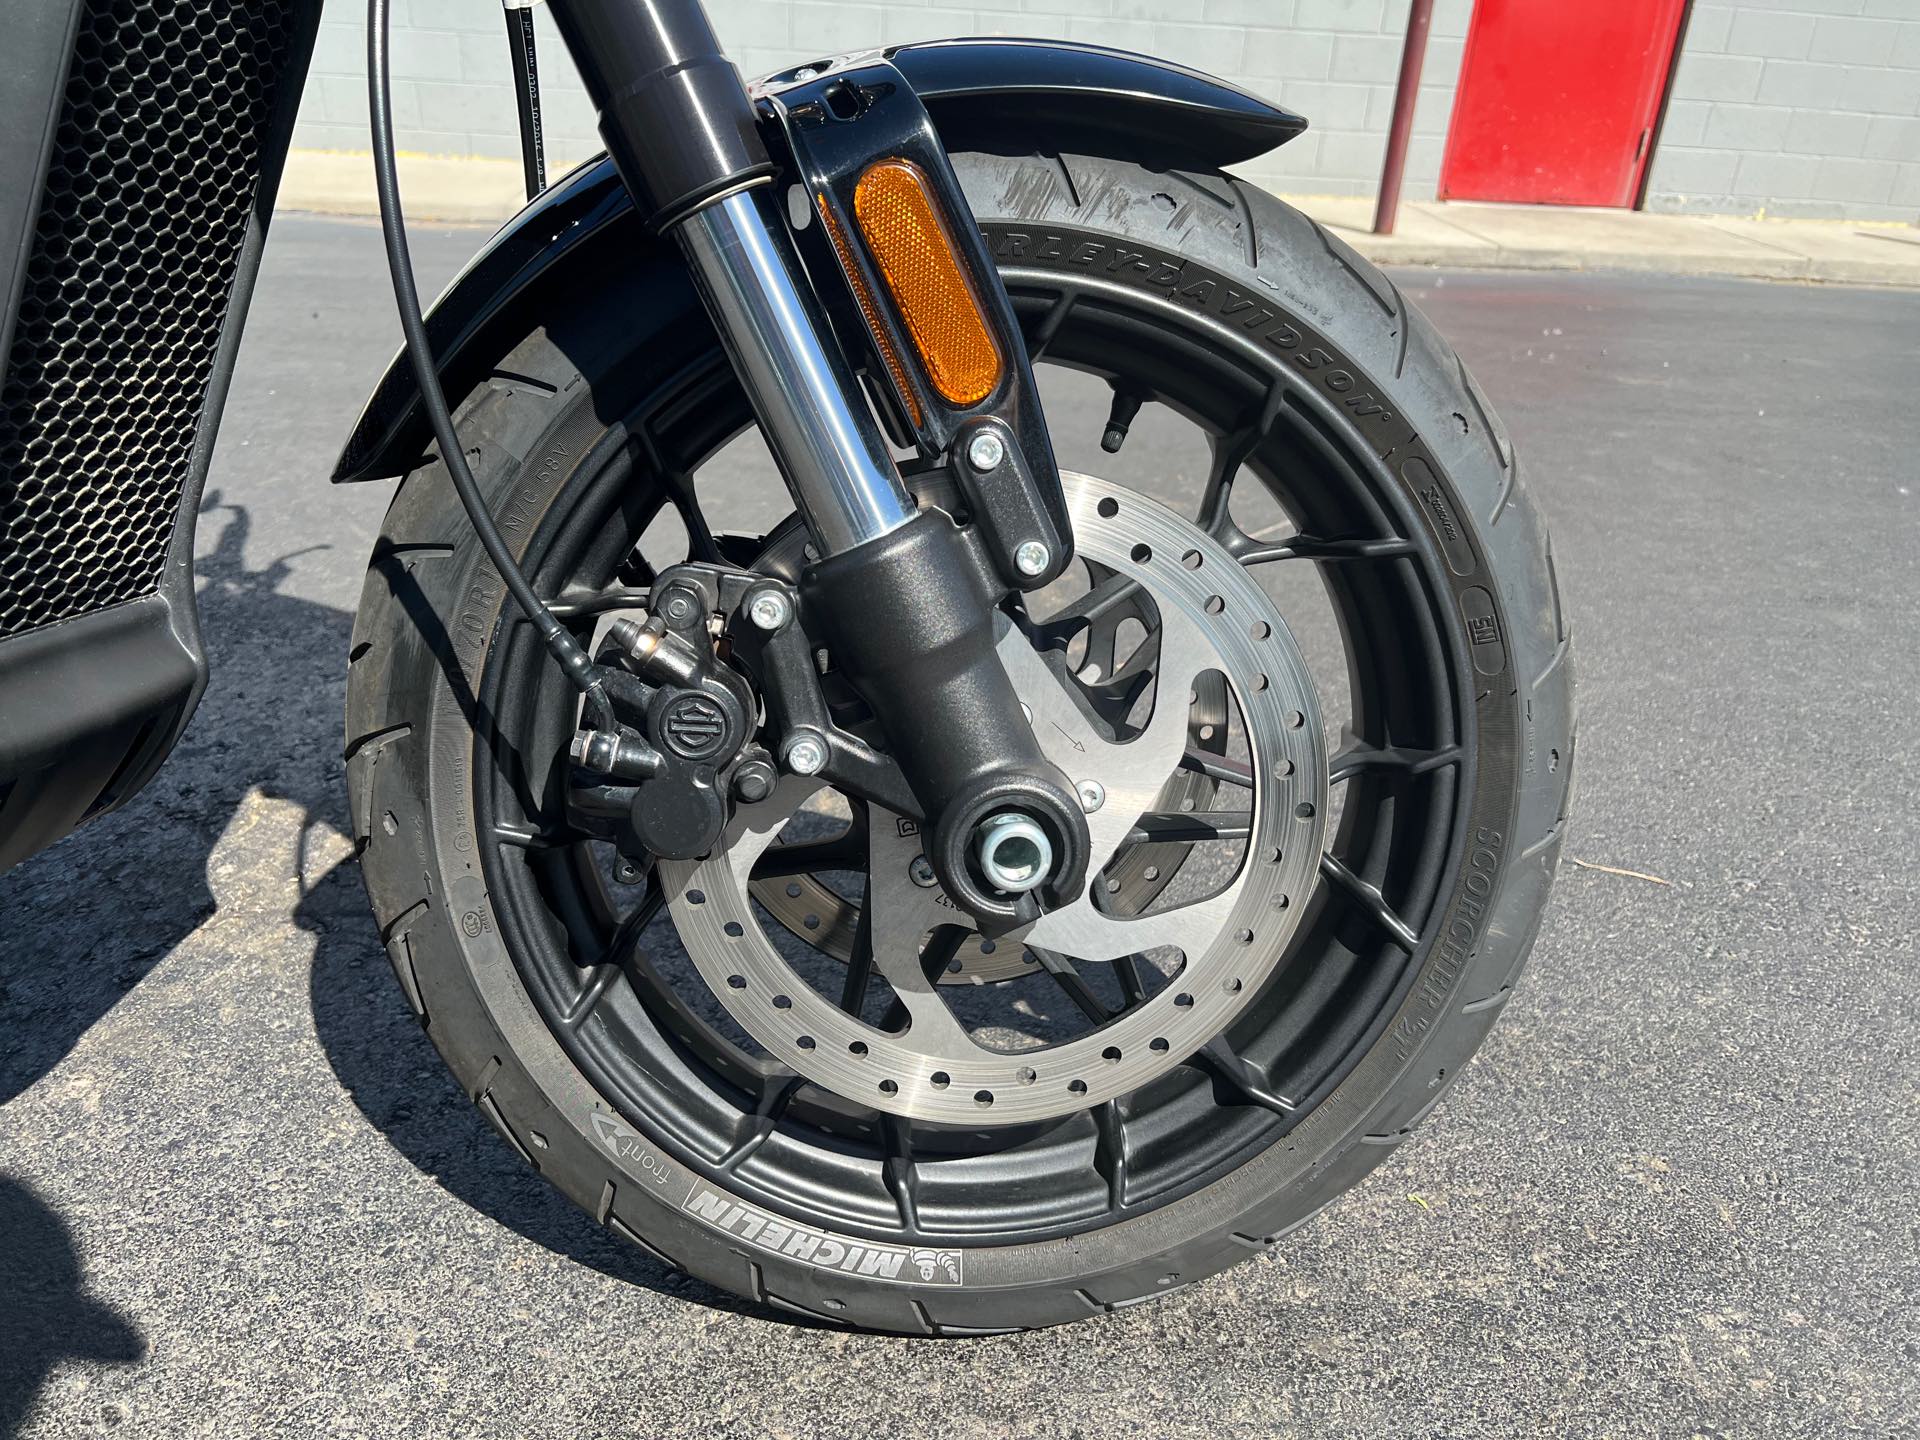 2018 Harley-Davidson Street Rod at Aces Motorcycles - Fort Collins